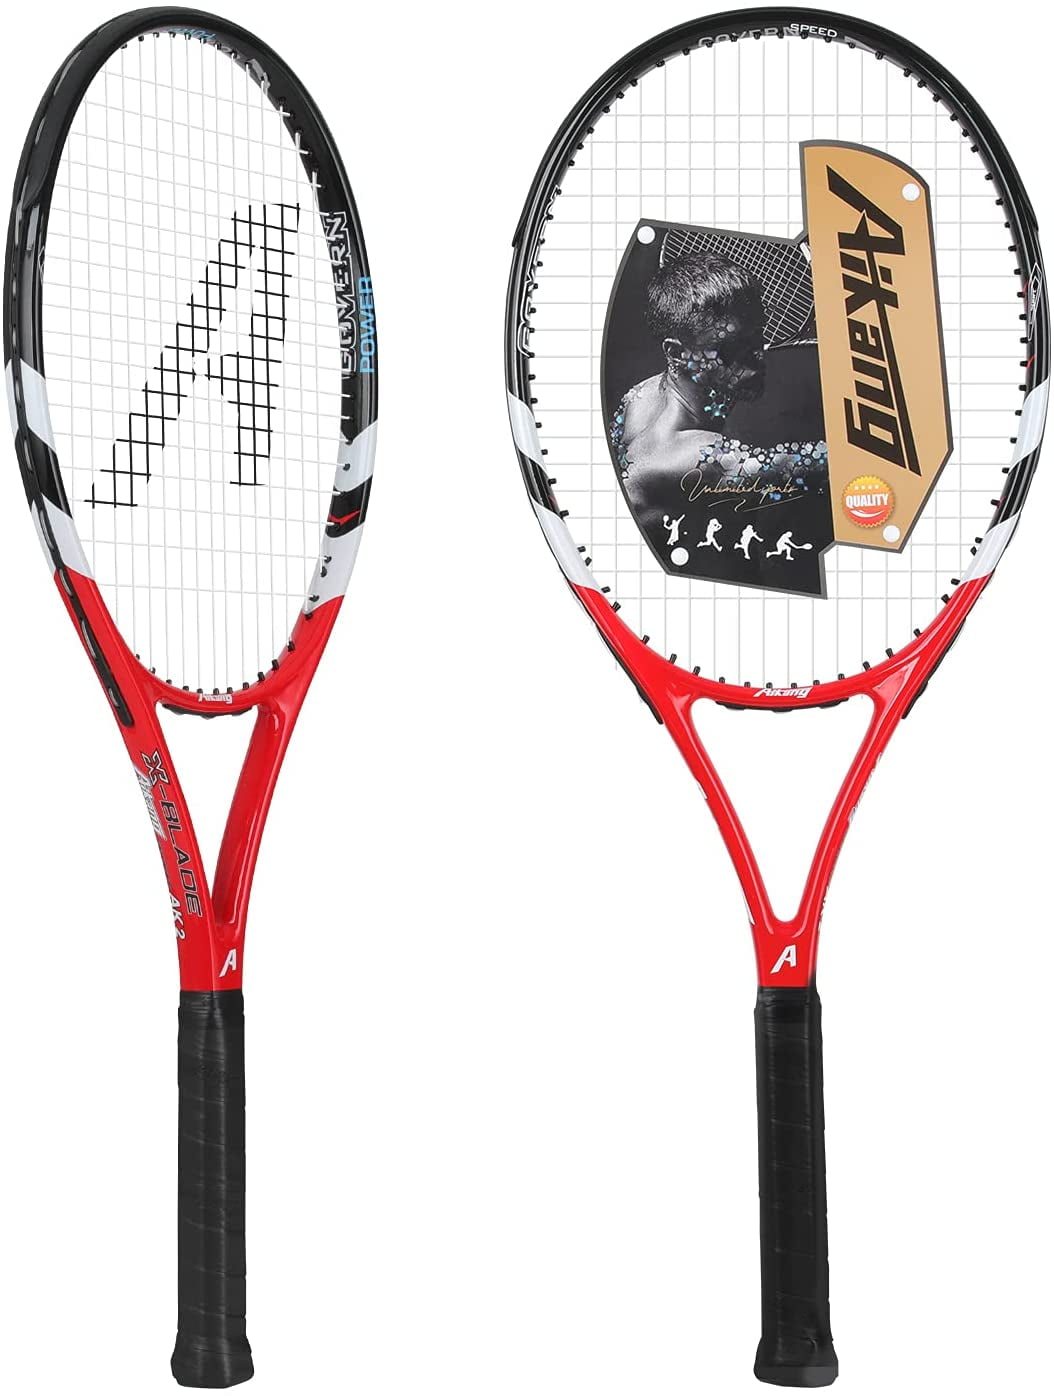 WILSON FULL LENGTH PERFORMANCE TENNIS RACKET COVER WITH ADJUSTABLE STRAP 